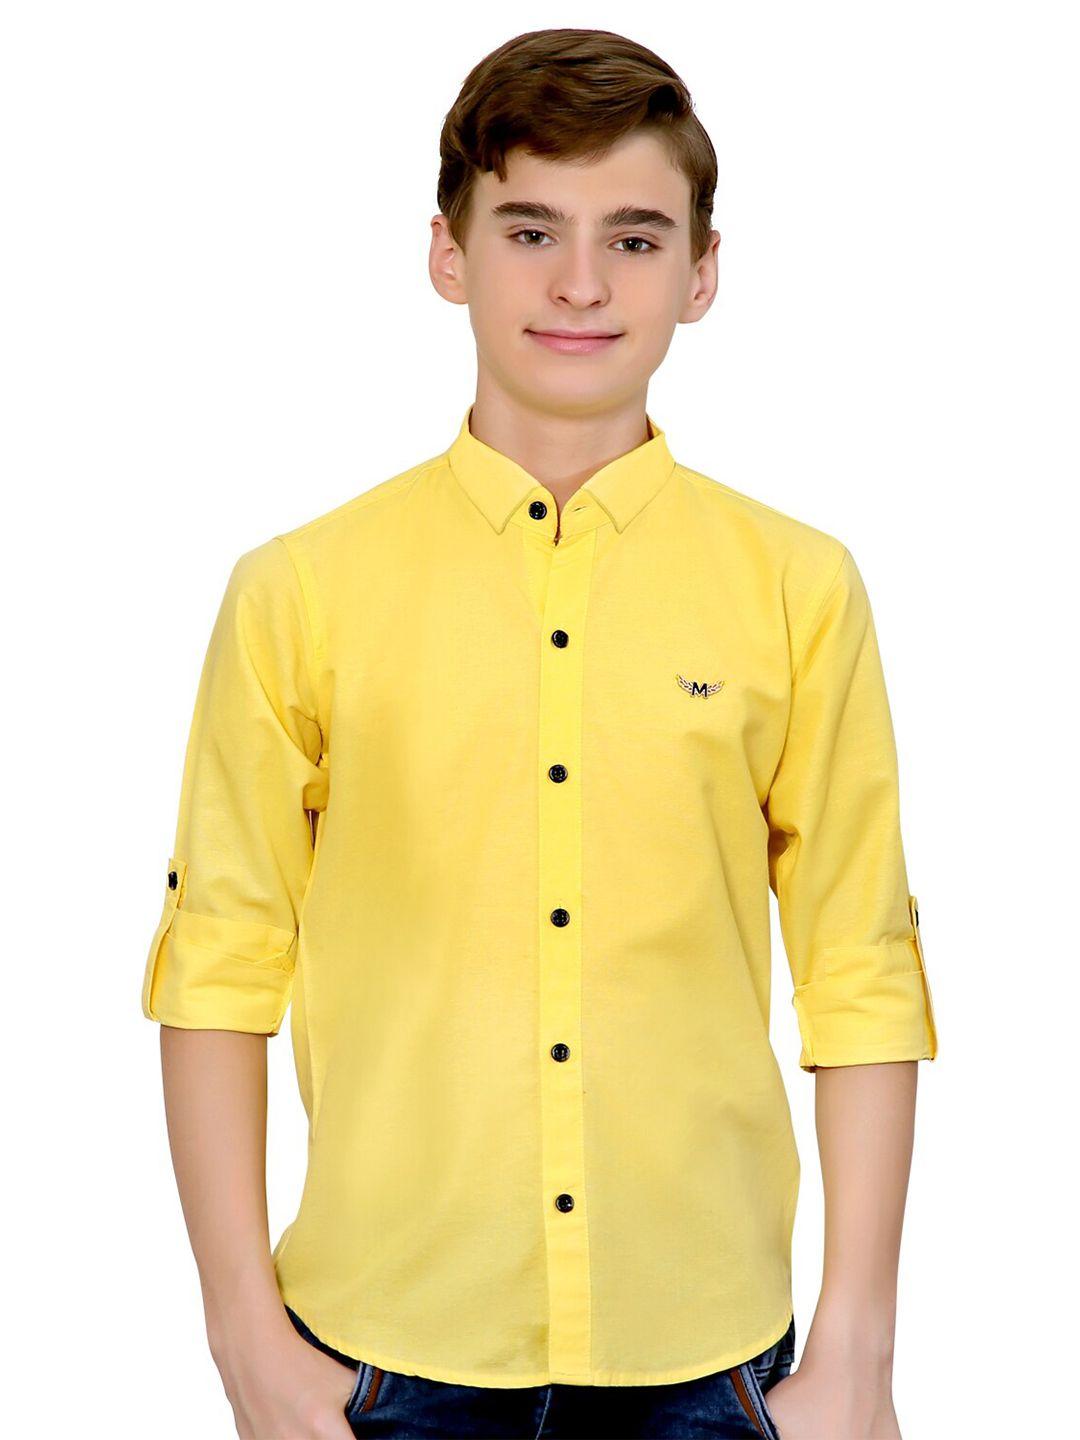 baesd-boys-classic-roll-up-sleeves-cotton-casual-shirt